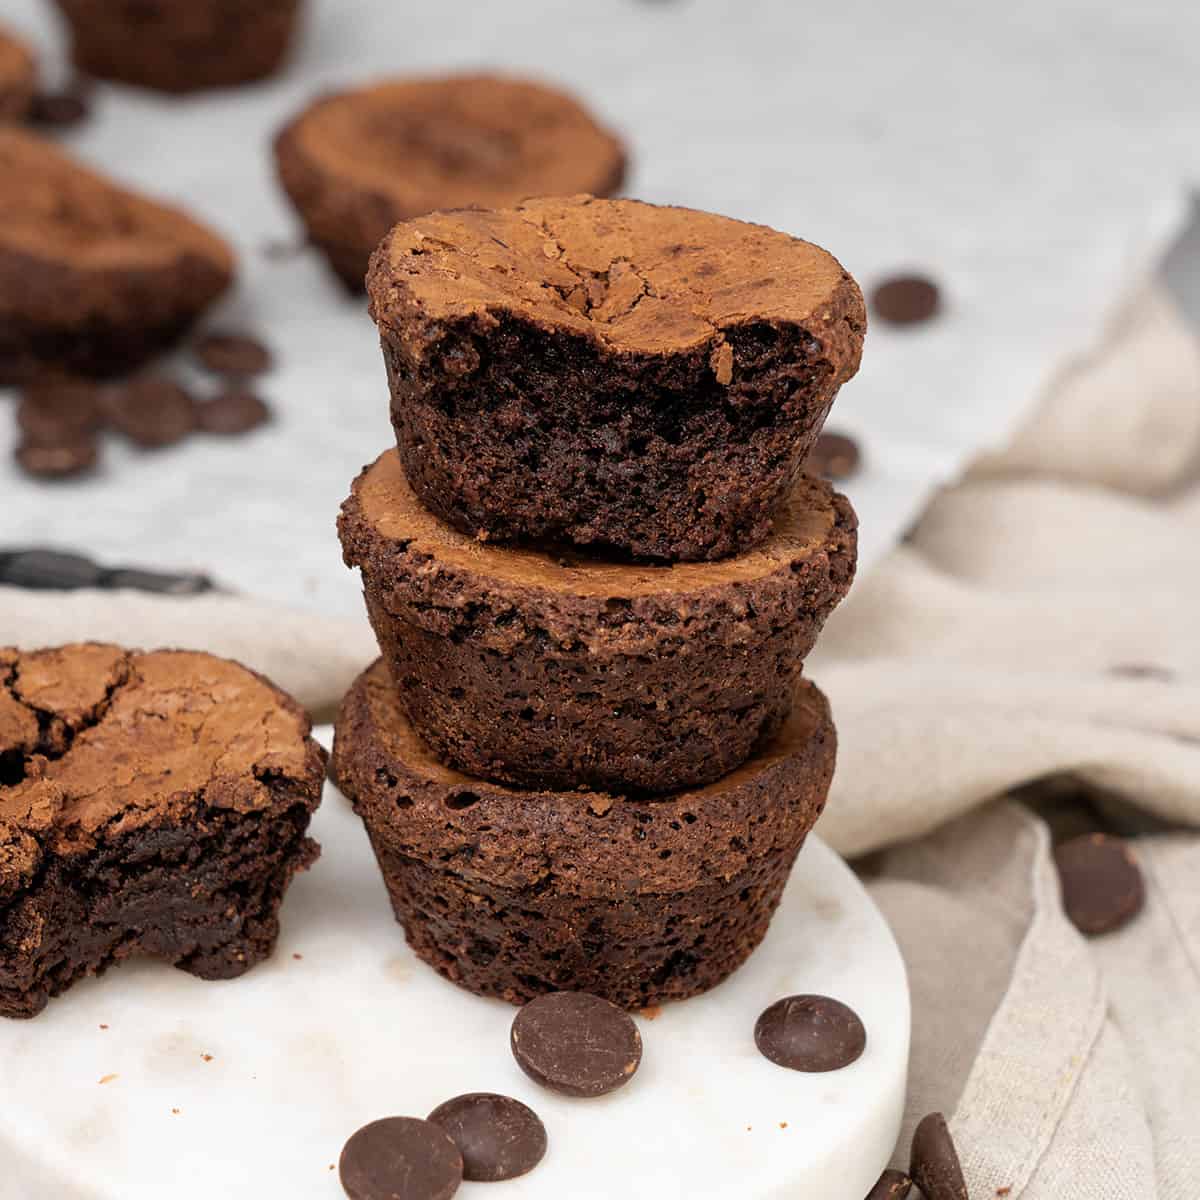 <p>There can't be many people in the world who don't love brownies. Certainly, baking <a href="https://www.spatuladesserts.com/category/recipes/cookies-brownies/">brownies</a> is one of my favorite things to do, and brownie bites are the perfect mini-chocolate desserts to make for parties, snacks, and more. </p> <p><strong>Go to the recipe: <a href="https://www.spatuladesserts.com/mini-brownie-bites/">Mini Brownie Bites</a></strong></p>